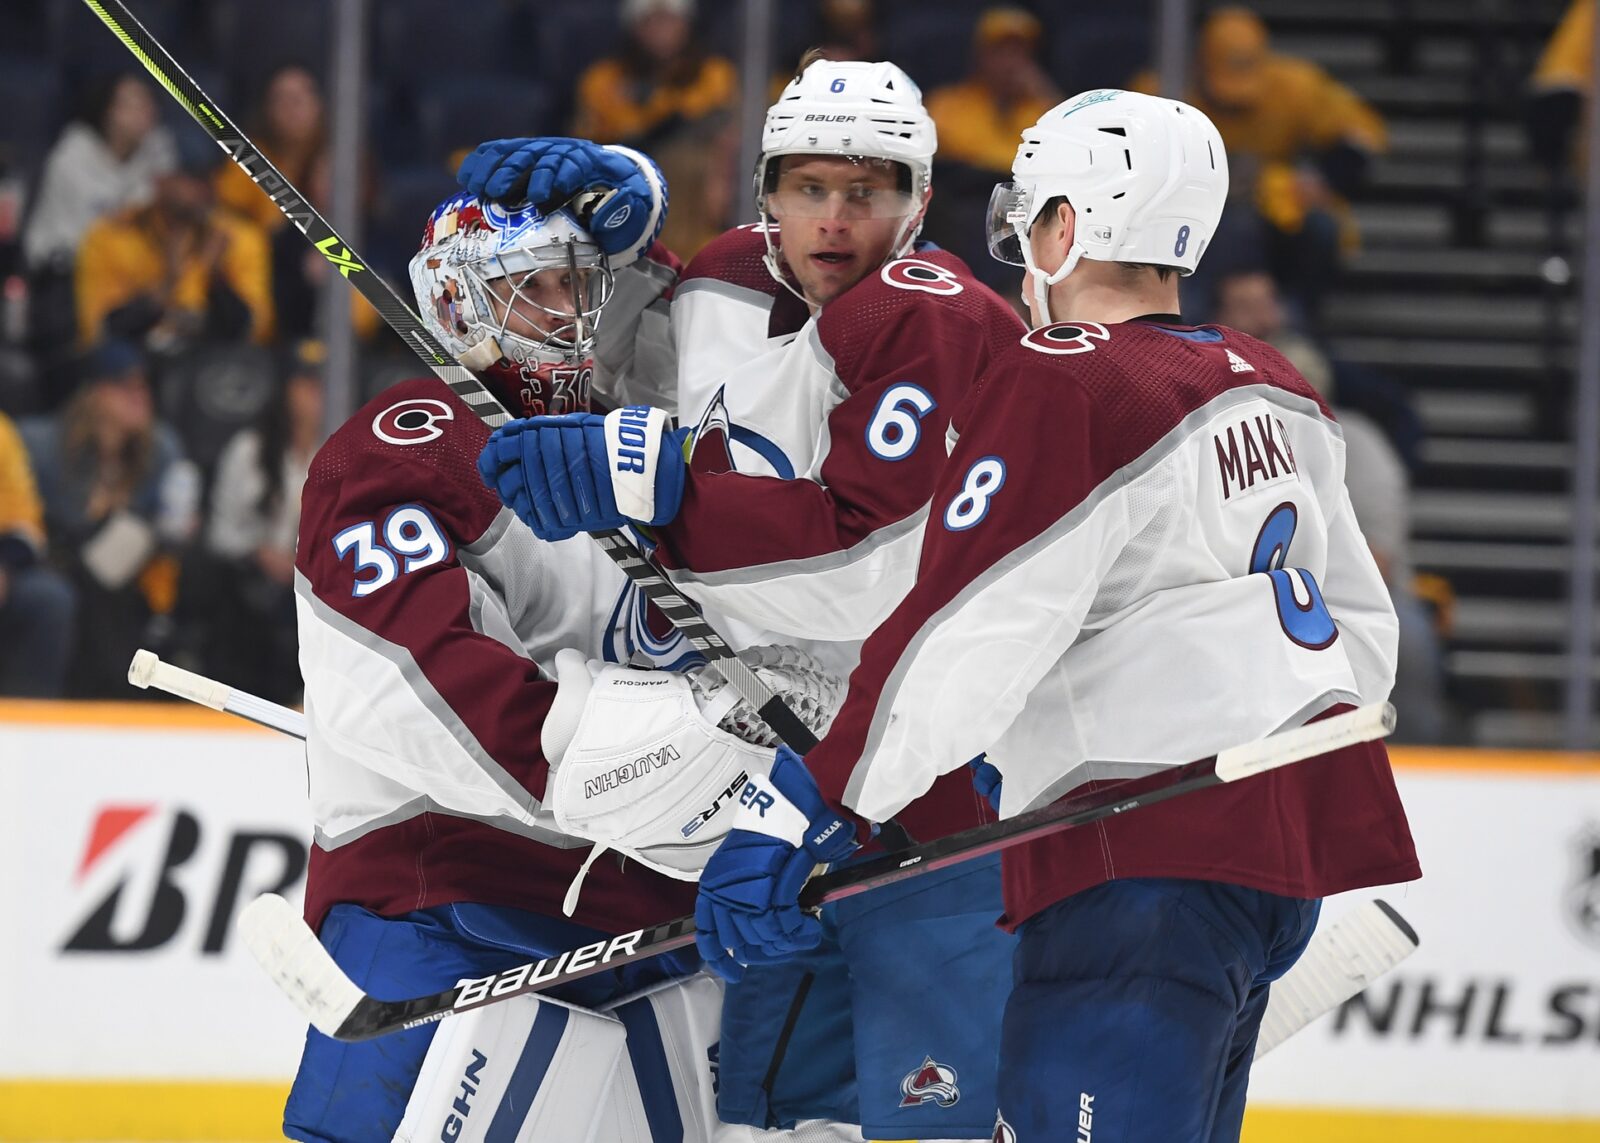 Playoff Preview: Injury in net could give Colorado Avalanche